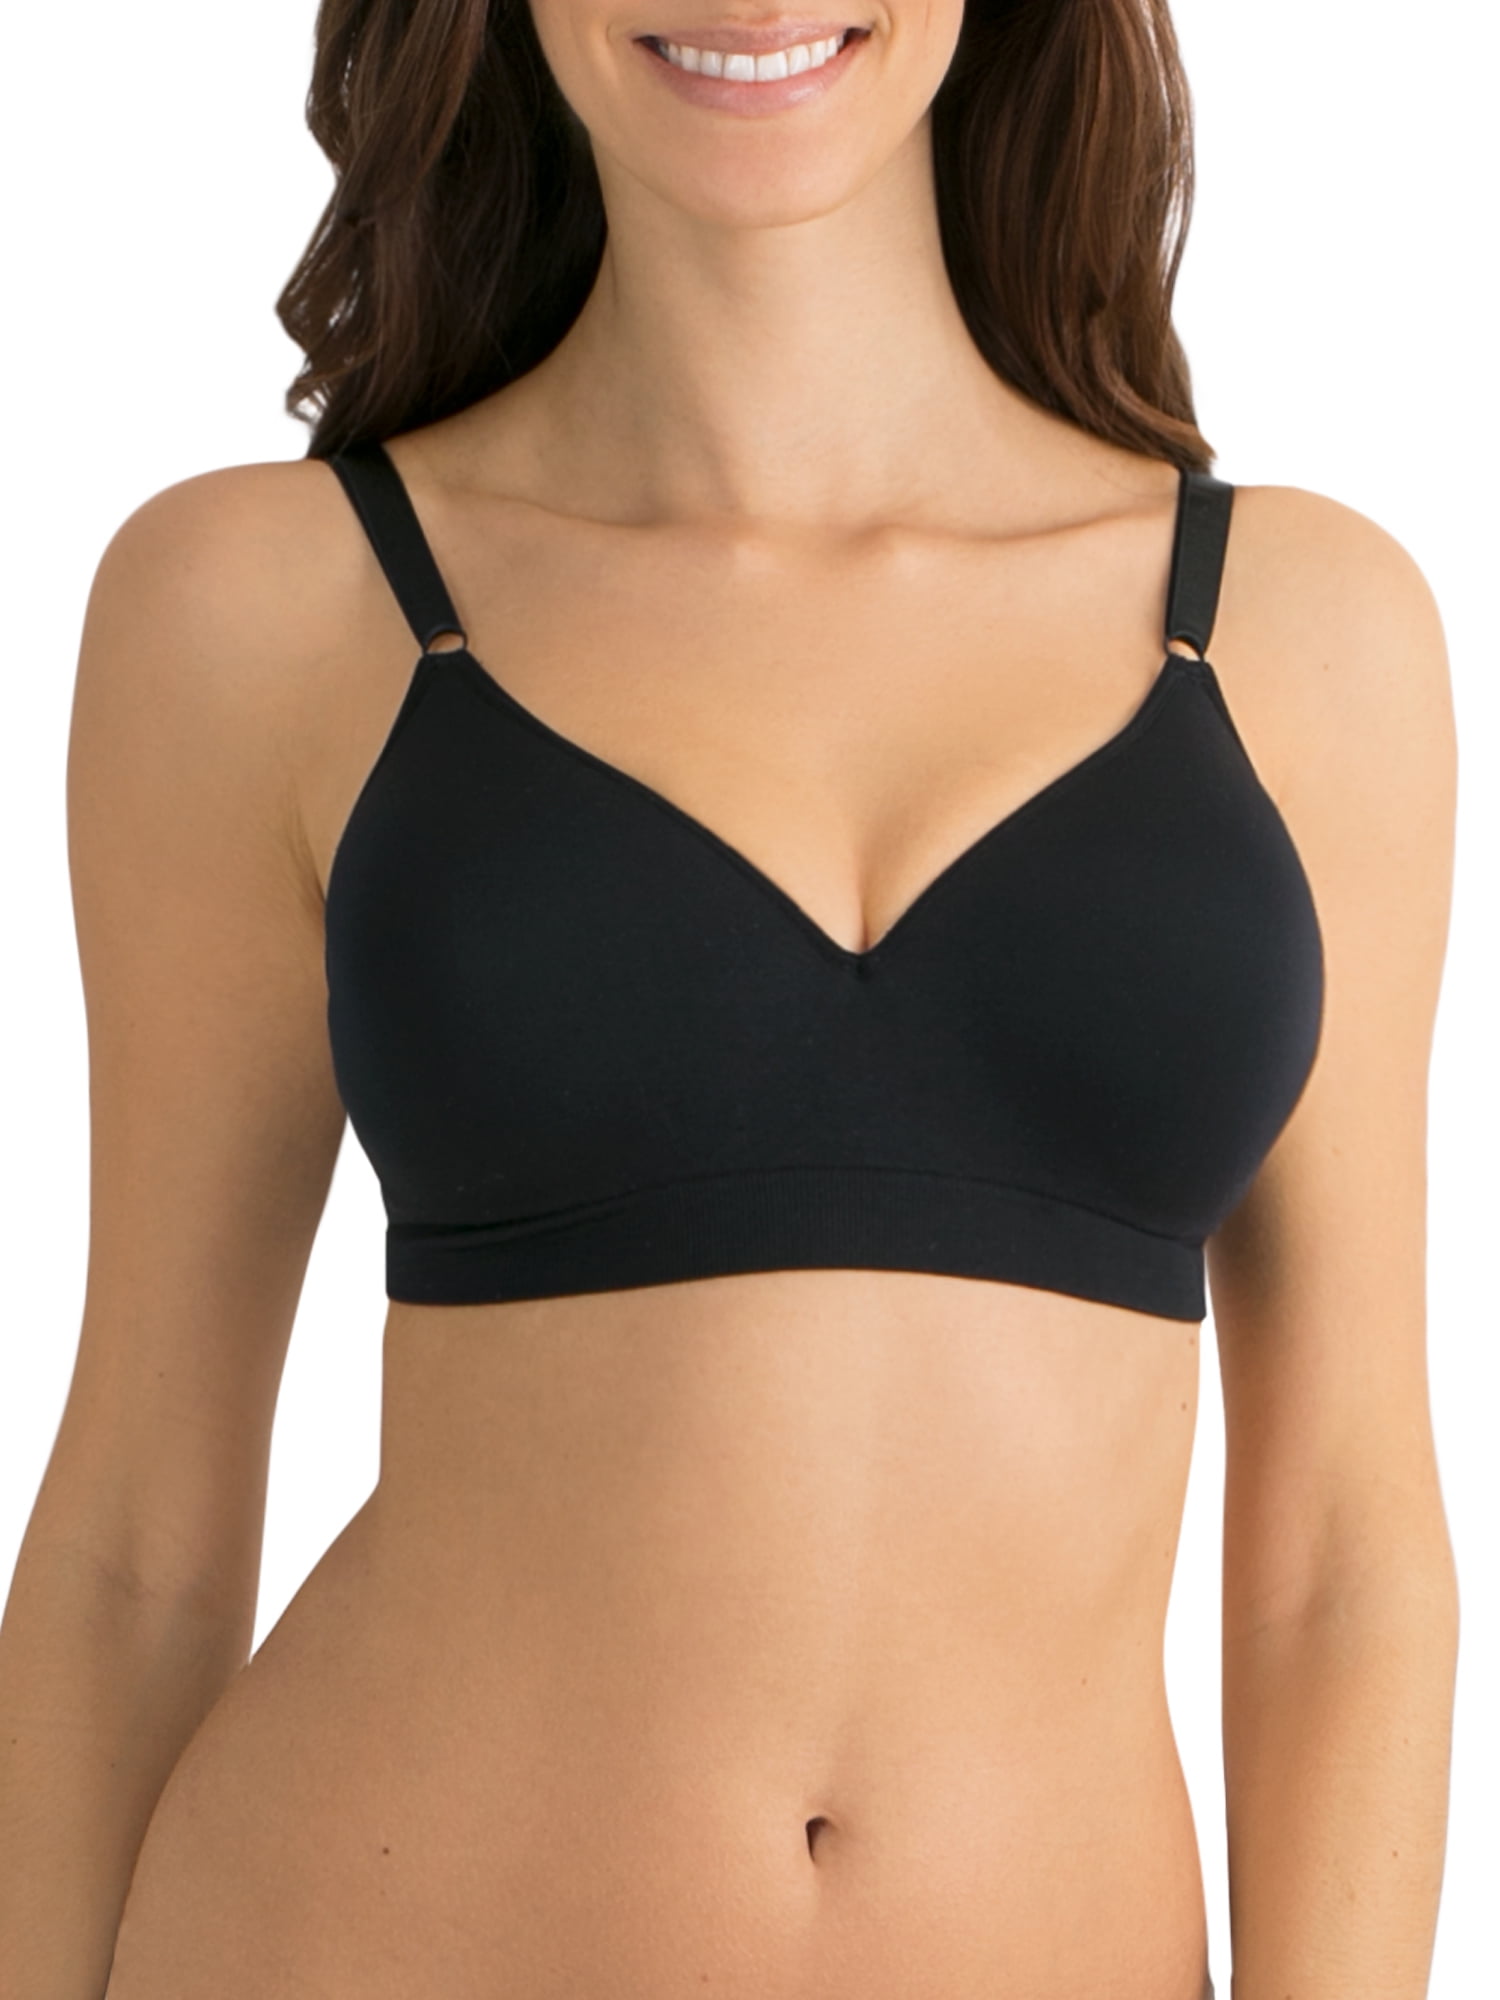 Fruit of the Loom Women's Seamless Wire Free Lift Bra, Style FT640 